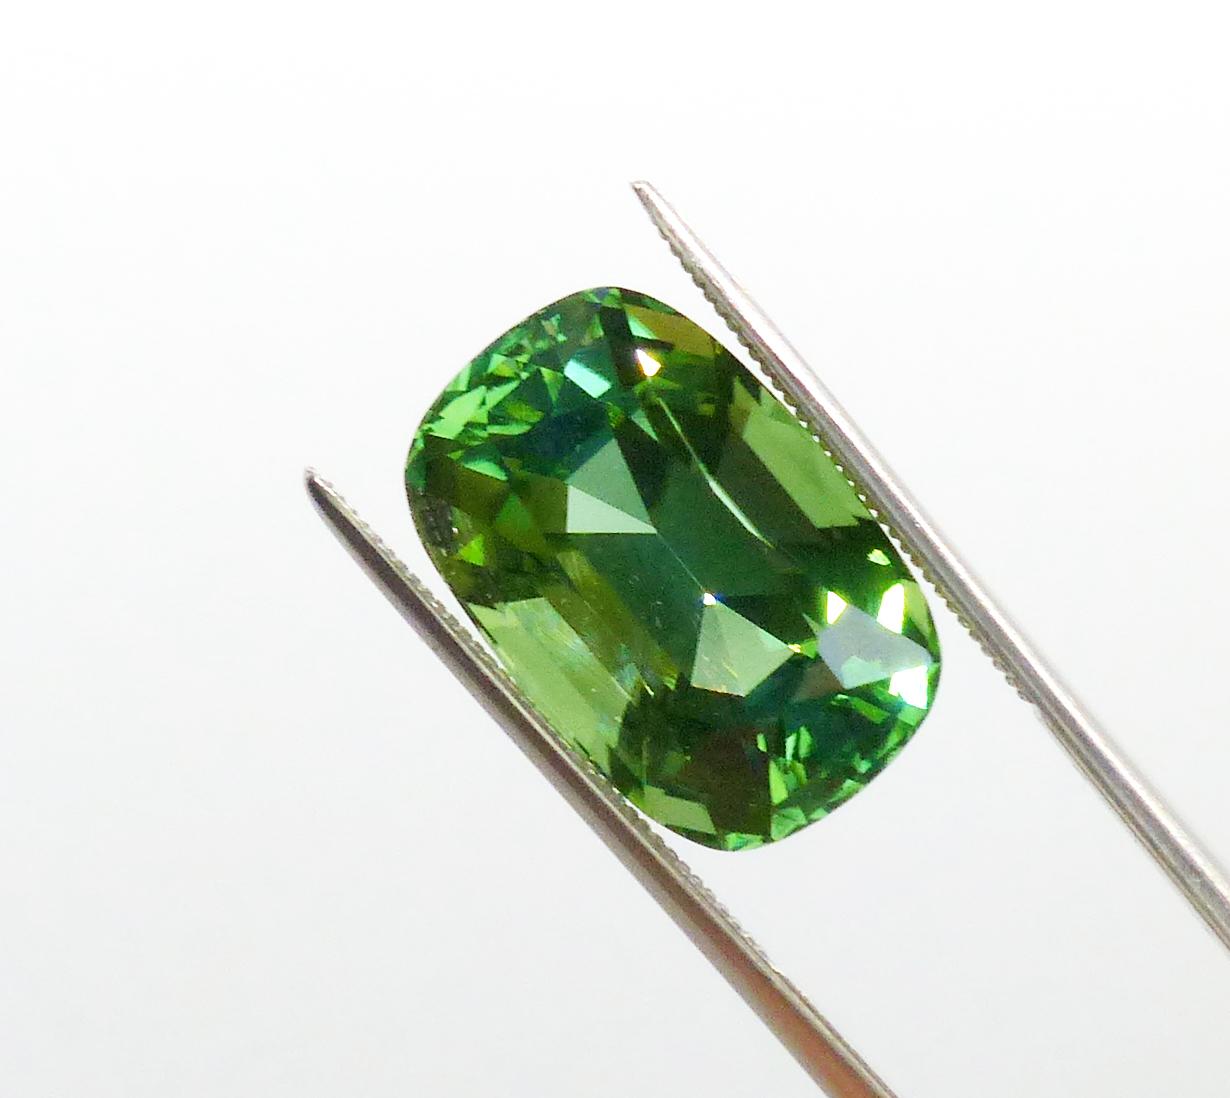 Cushion Cut Neon Green Tourmaline (with hints/flashes of Sky or Mint Blue) - LARGE 11.30cts For Sale